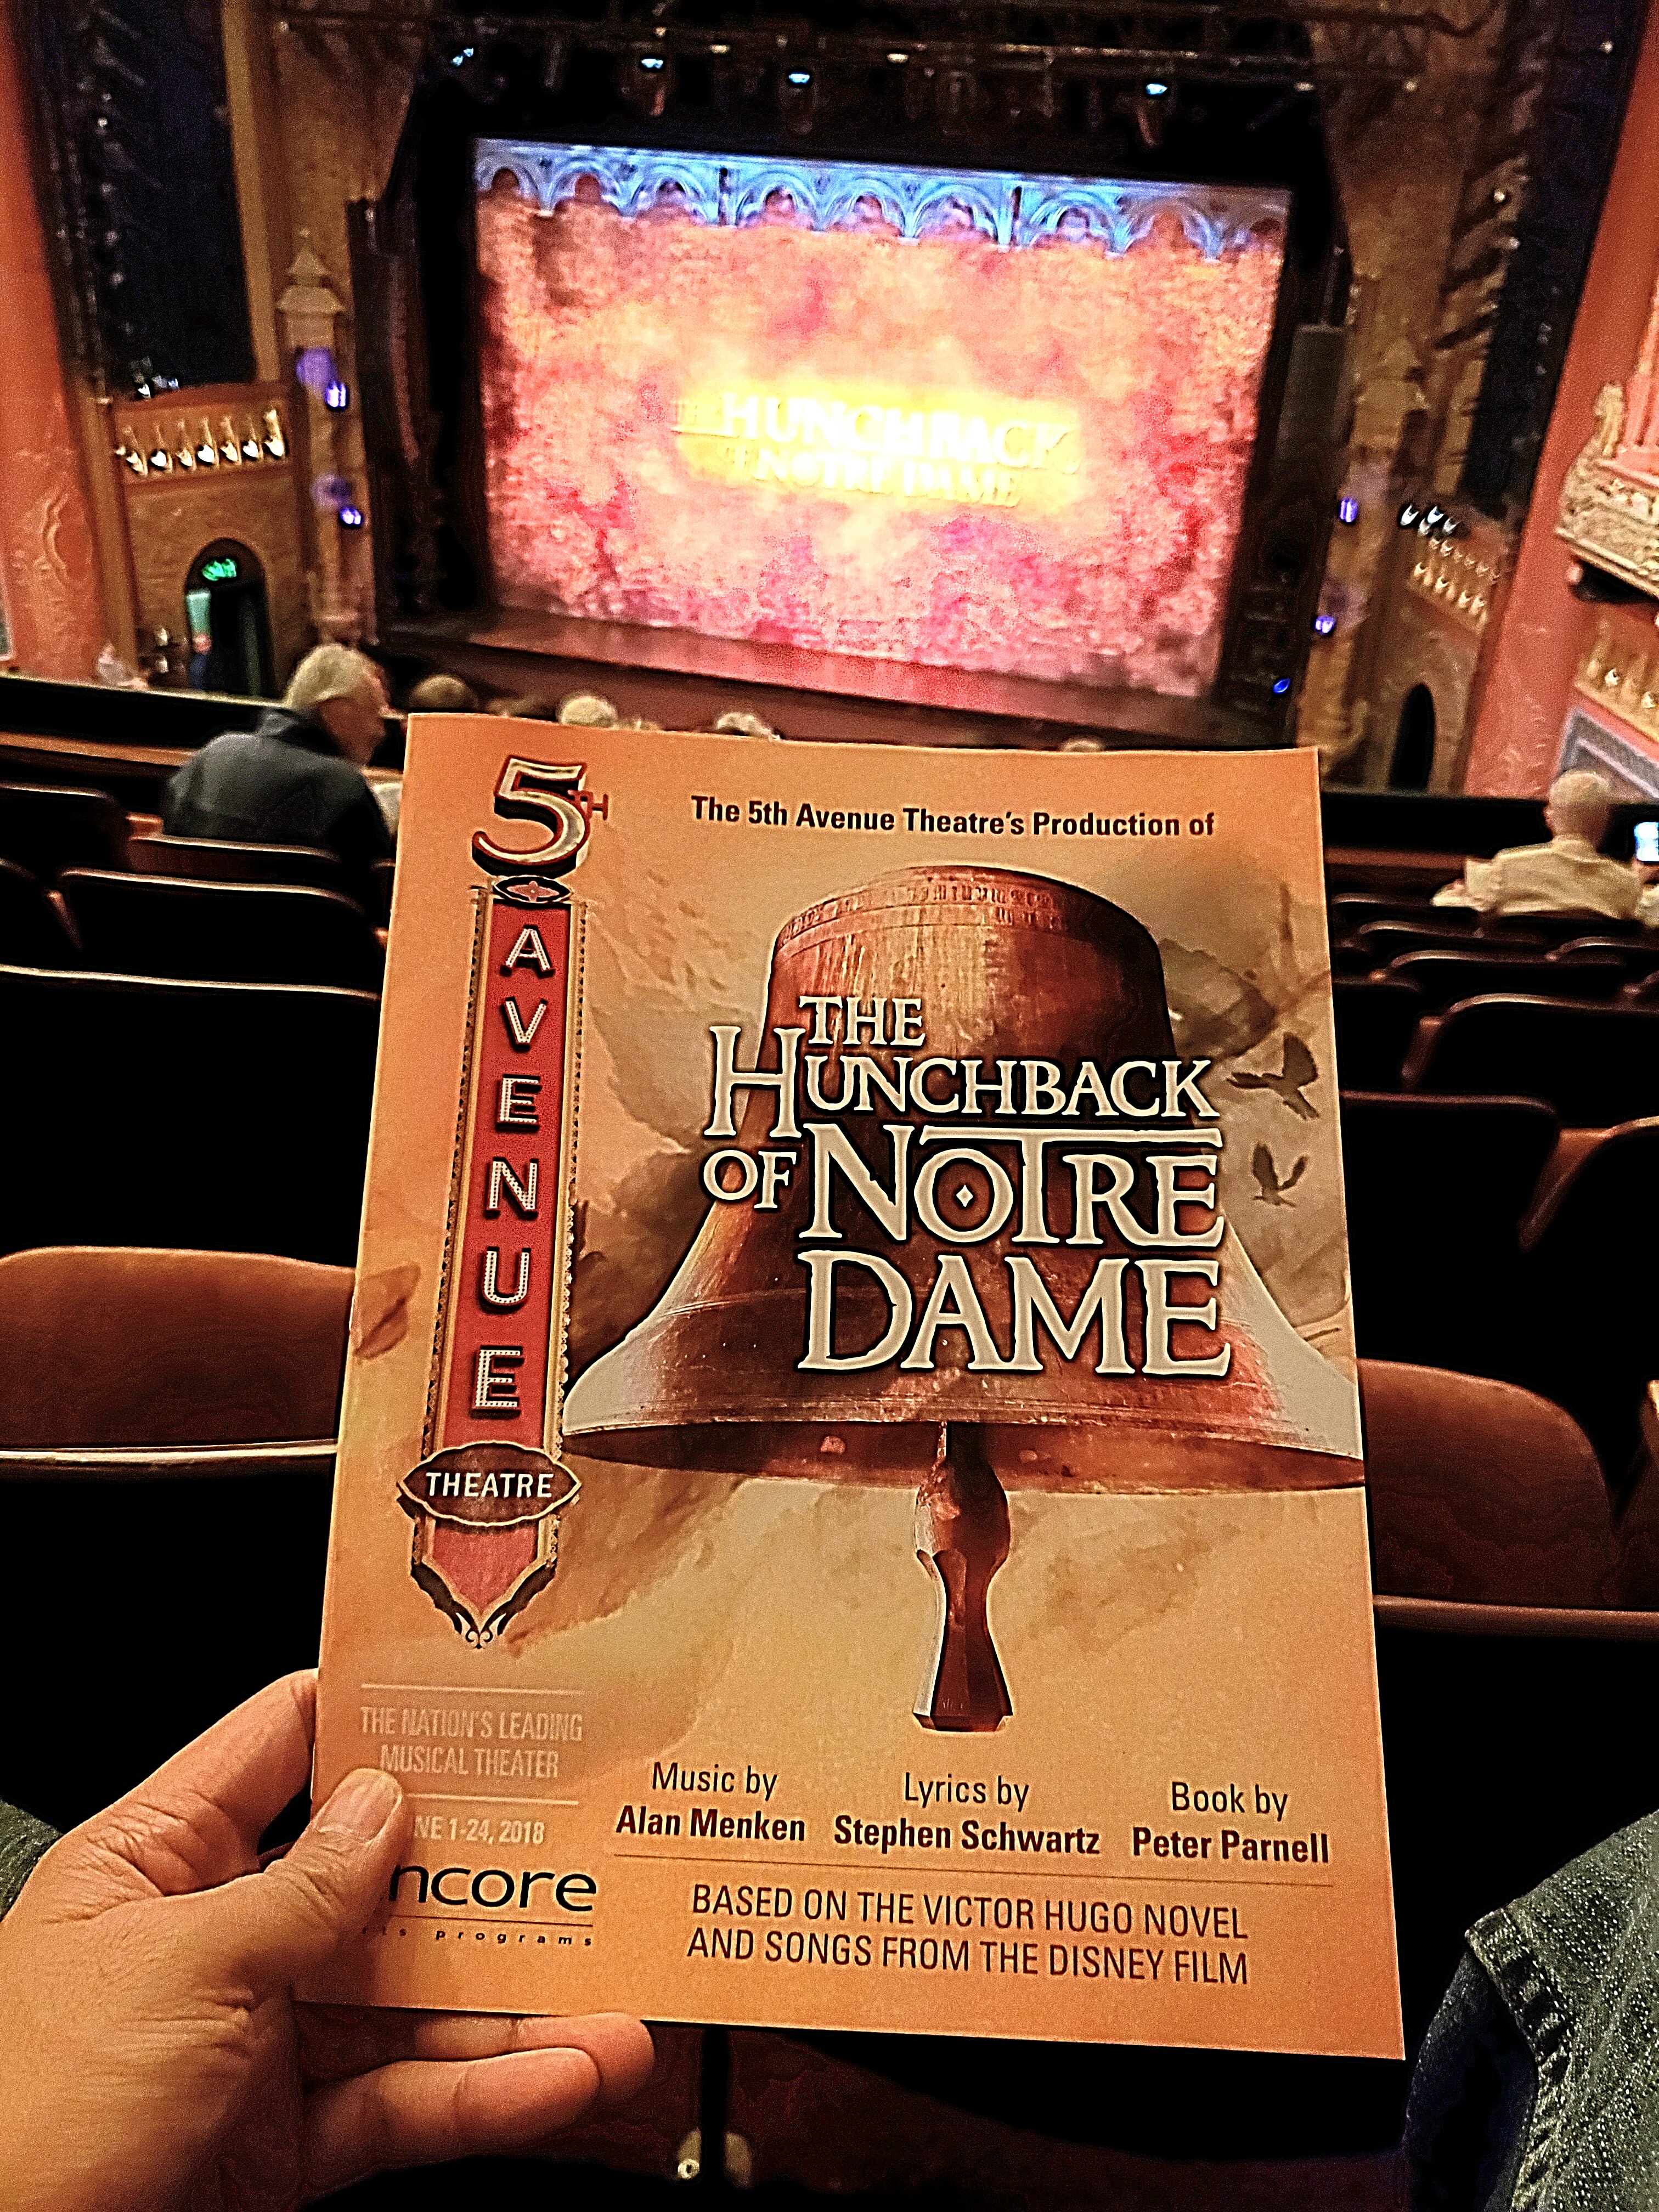 Watched The Hunchback of Notre Dame: The Musical. This tragedy ain't your grandma's Disney version (but they share many songs). The star actor playing the hunchback was deaf (with a surrogate singer) & the cast signed the dialogue/lyrics. Very elaborate music score.